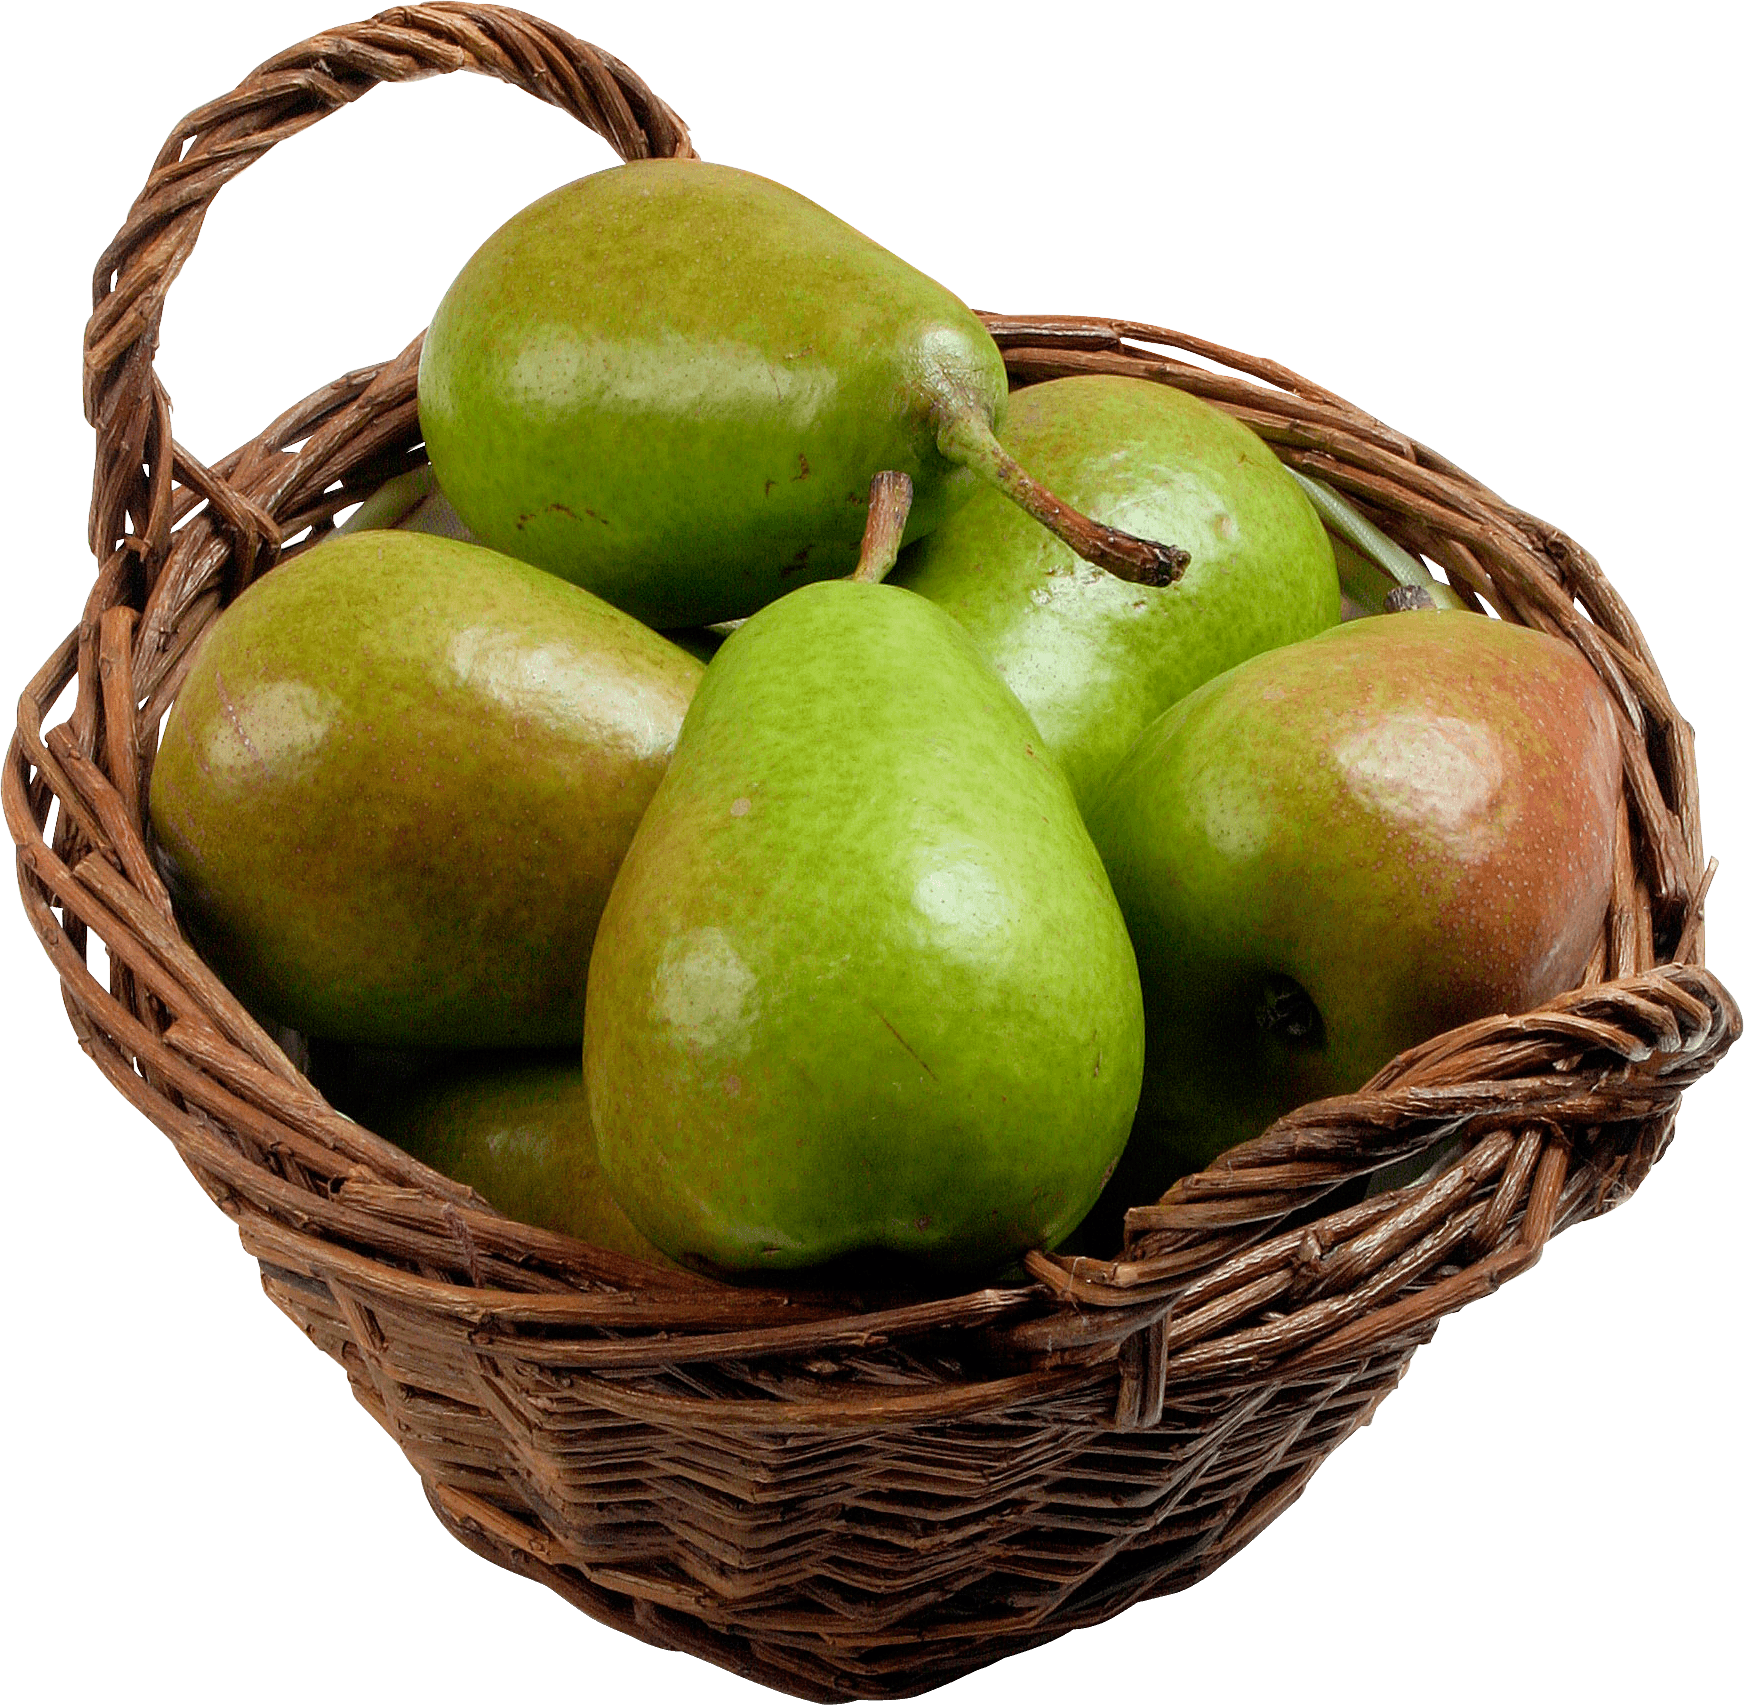 Download Green Pears In Basket Png Image HQ PNG Image | FreePNGImg